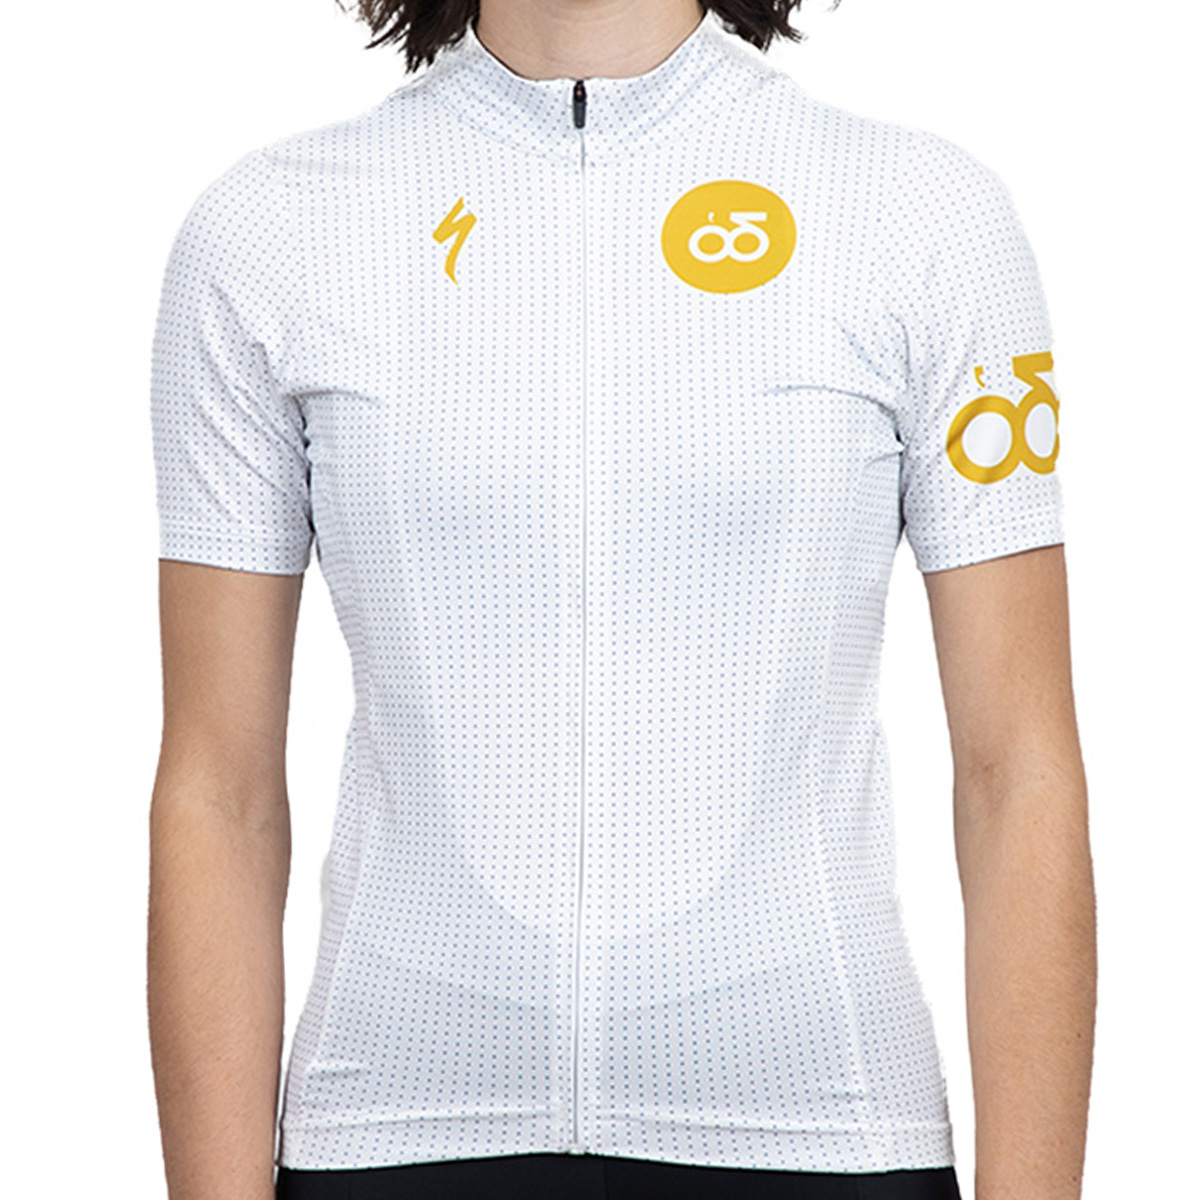 ODOS DOTTED WOMEN JERSEY